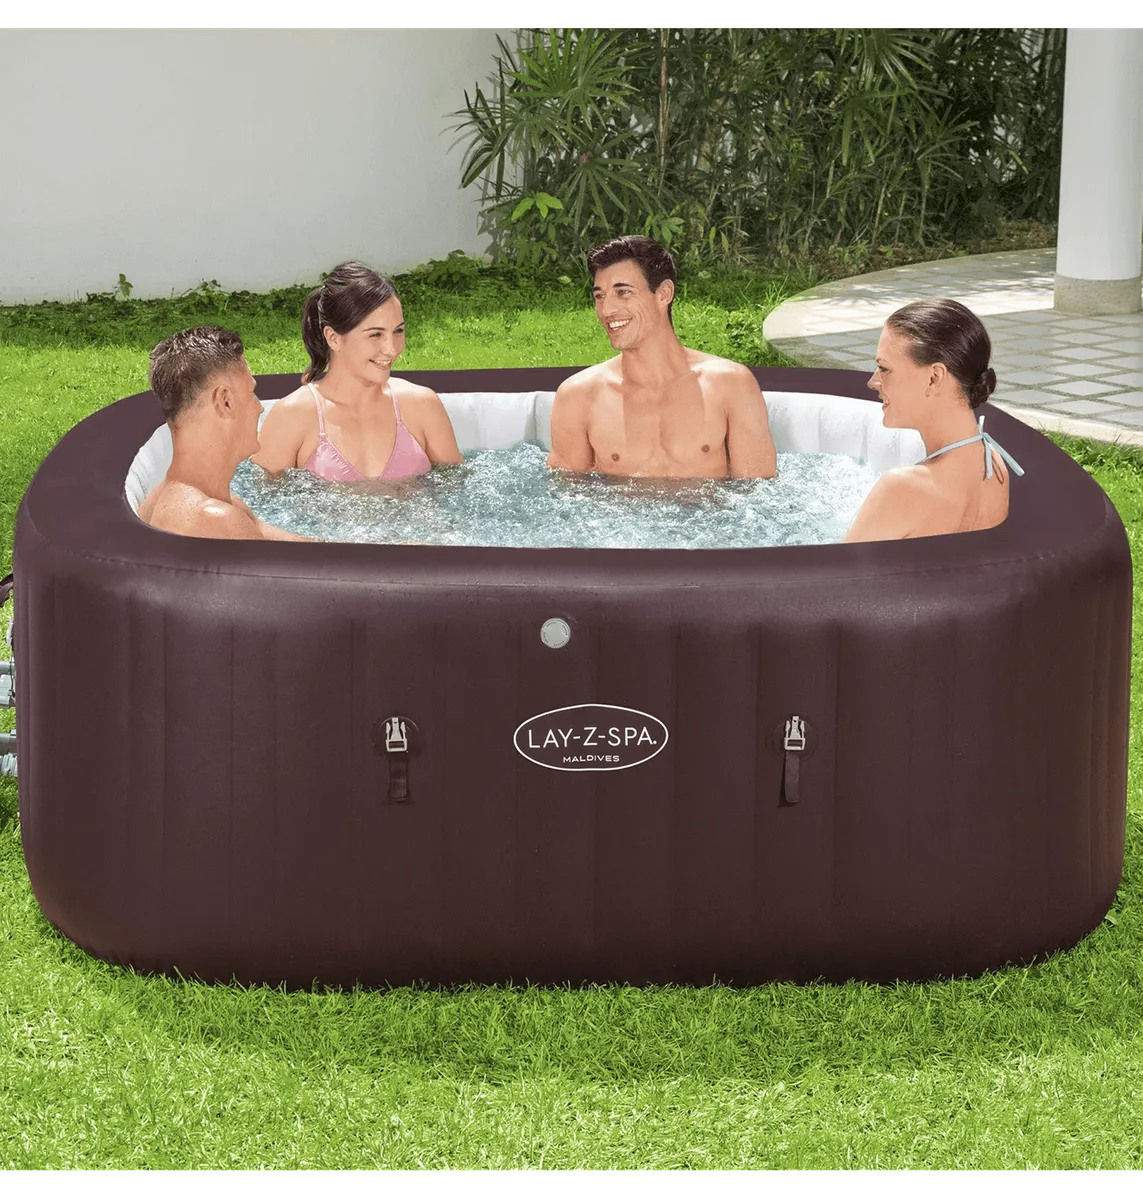 SPA GONFLABLE BESTWAY LAY-Z-SPA MALDIVES HYDROJET PRO 5-7 pers